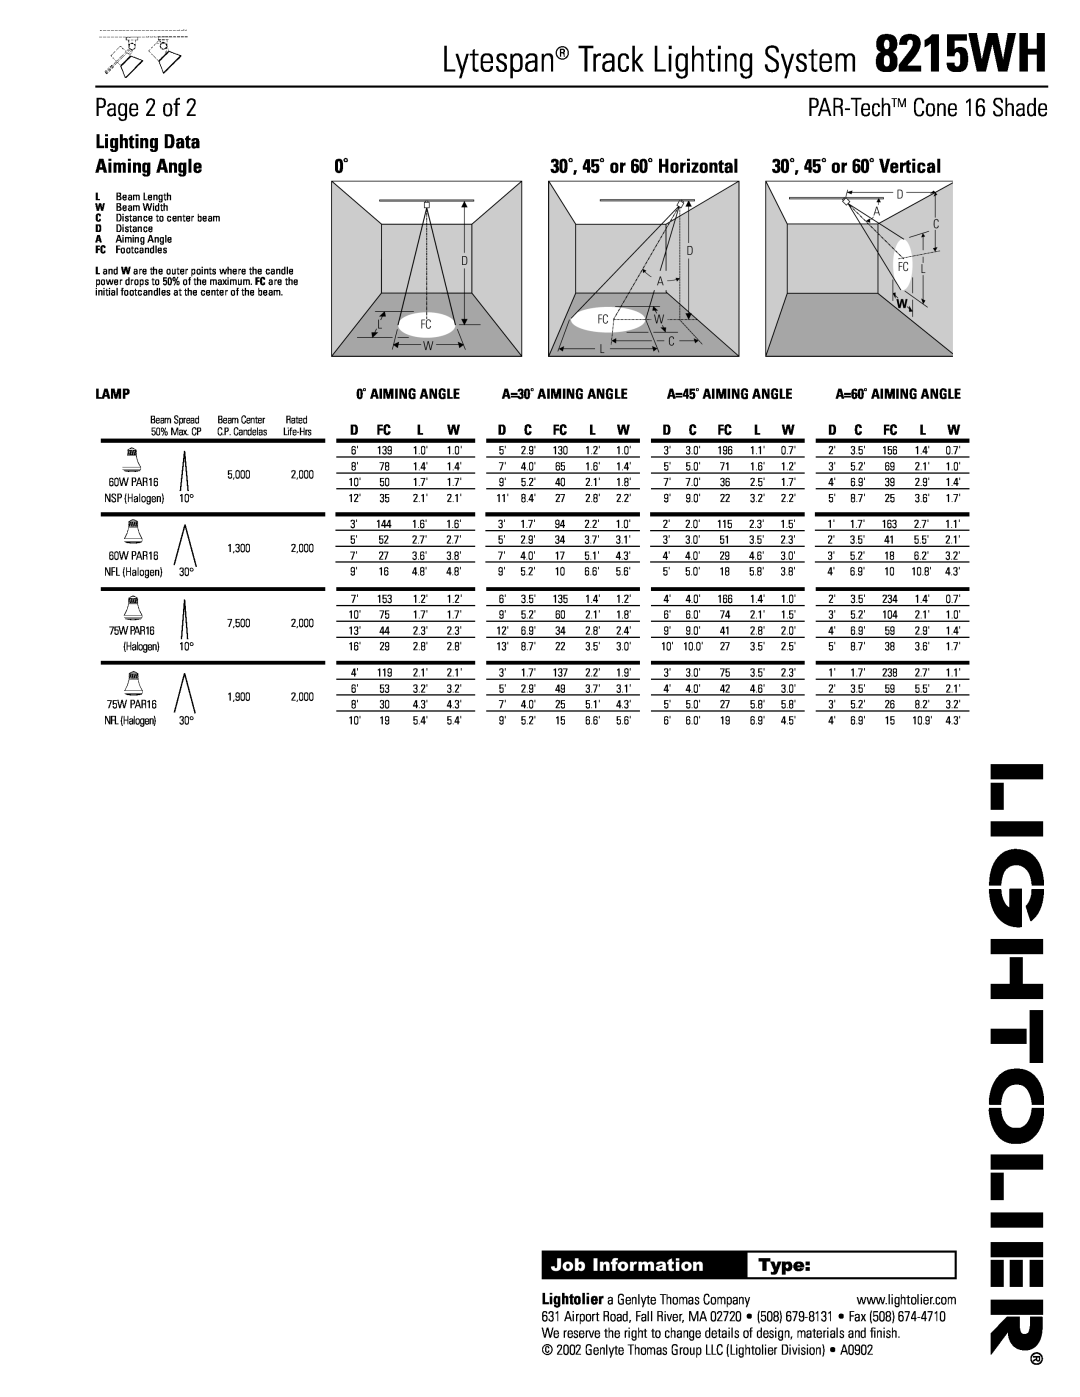 Lightolier 8215WH Page 2 of, PAR-TechTM Cone 16 Shade, Lighting Data, Aiming Angle, 30˚, 45˚ or 60˚ Horizontal, Type, Lamp 